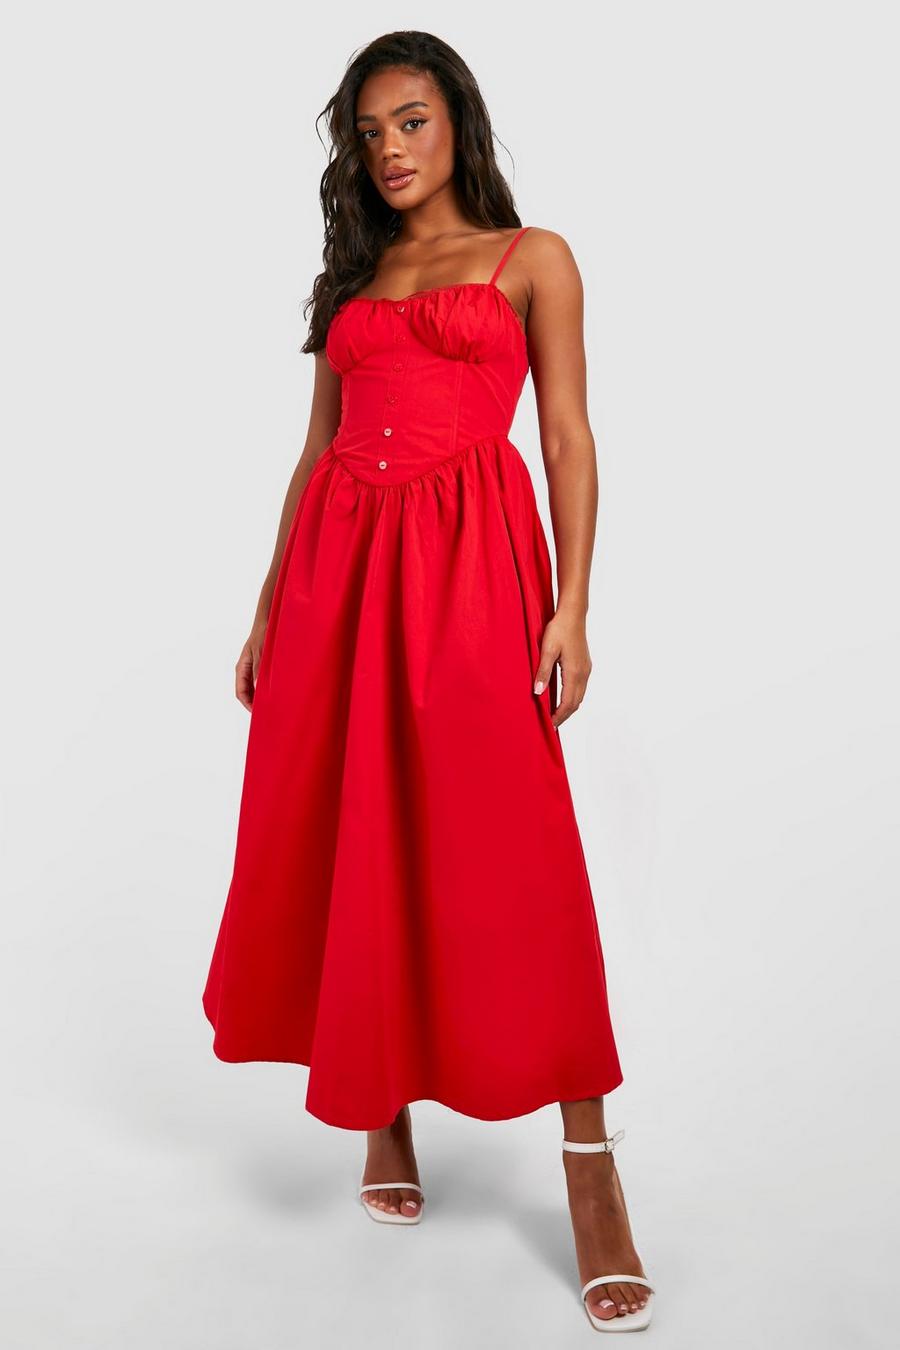 Red Engagement Party Dresses